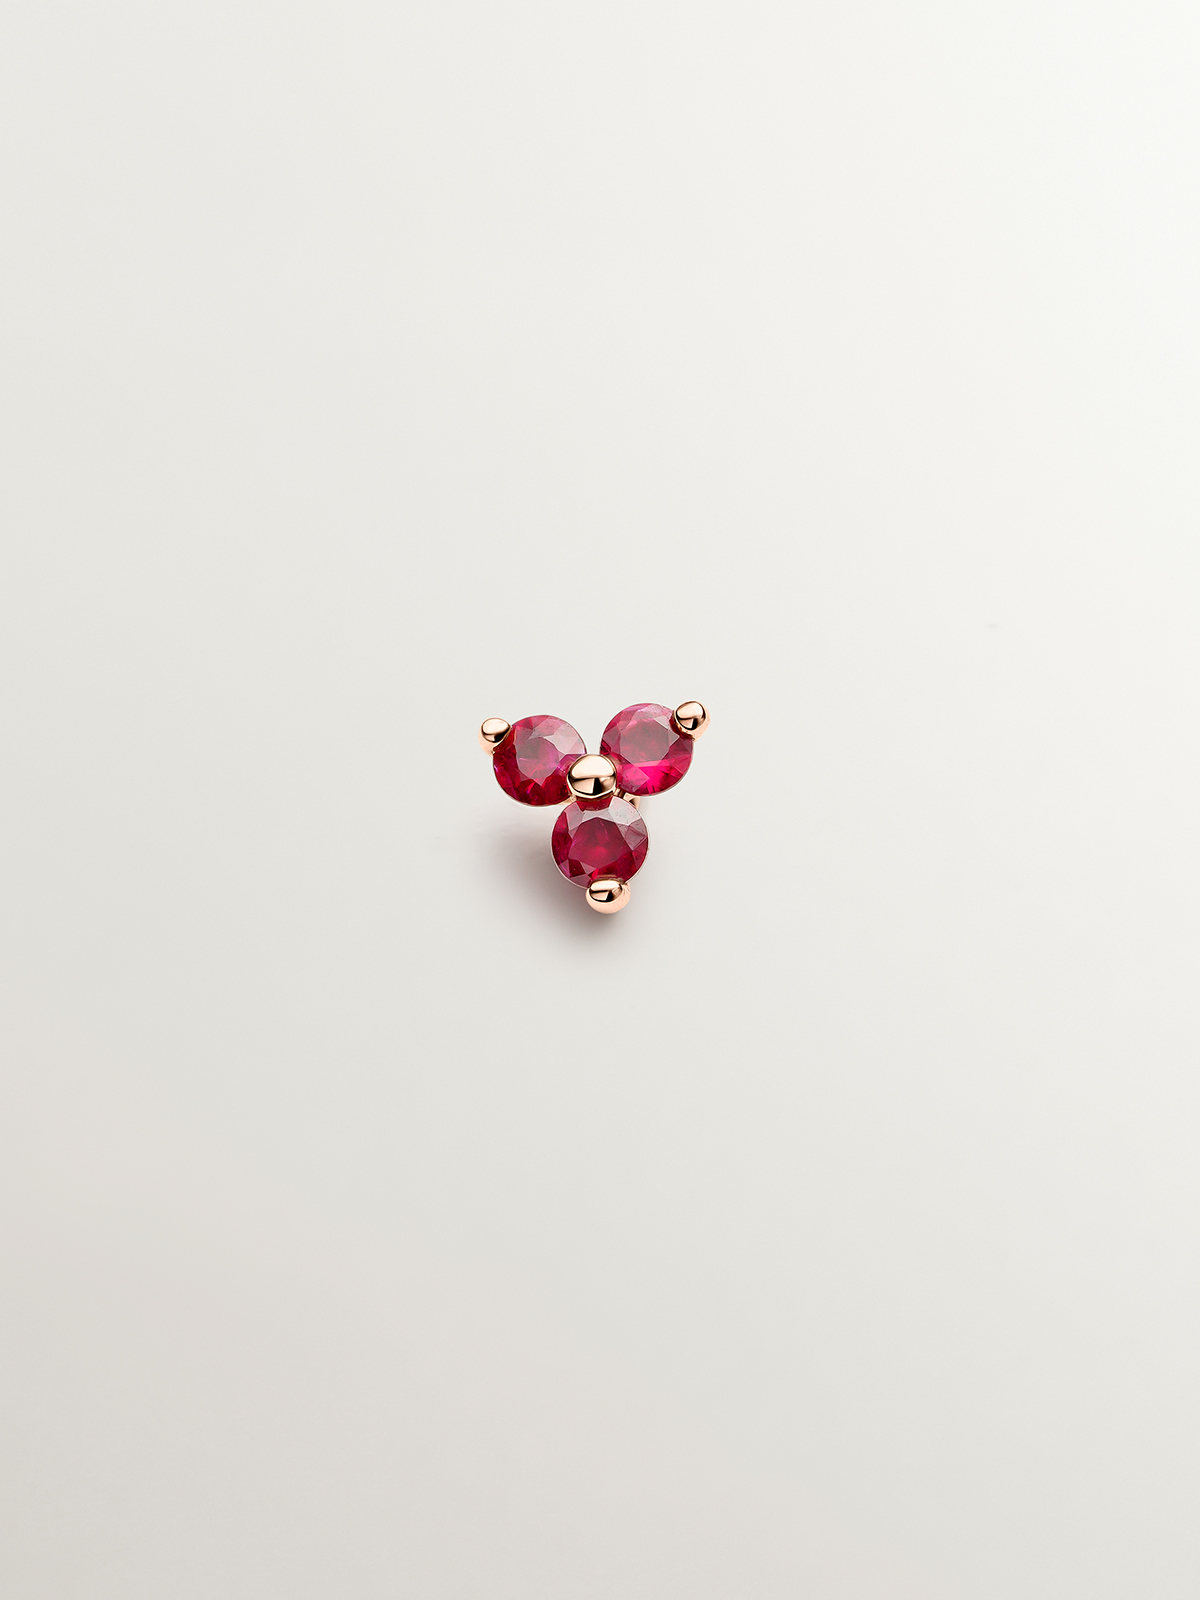 Individual 9K rose gold earring with rubies